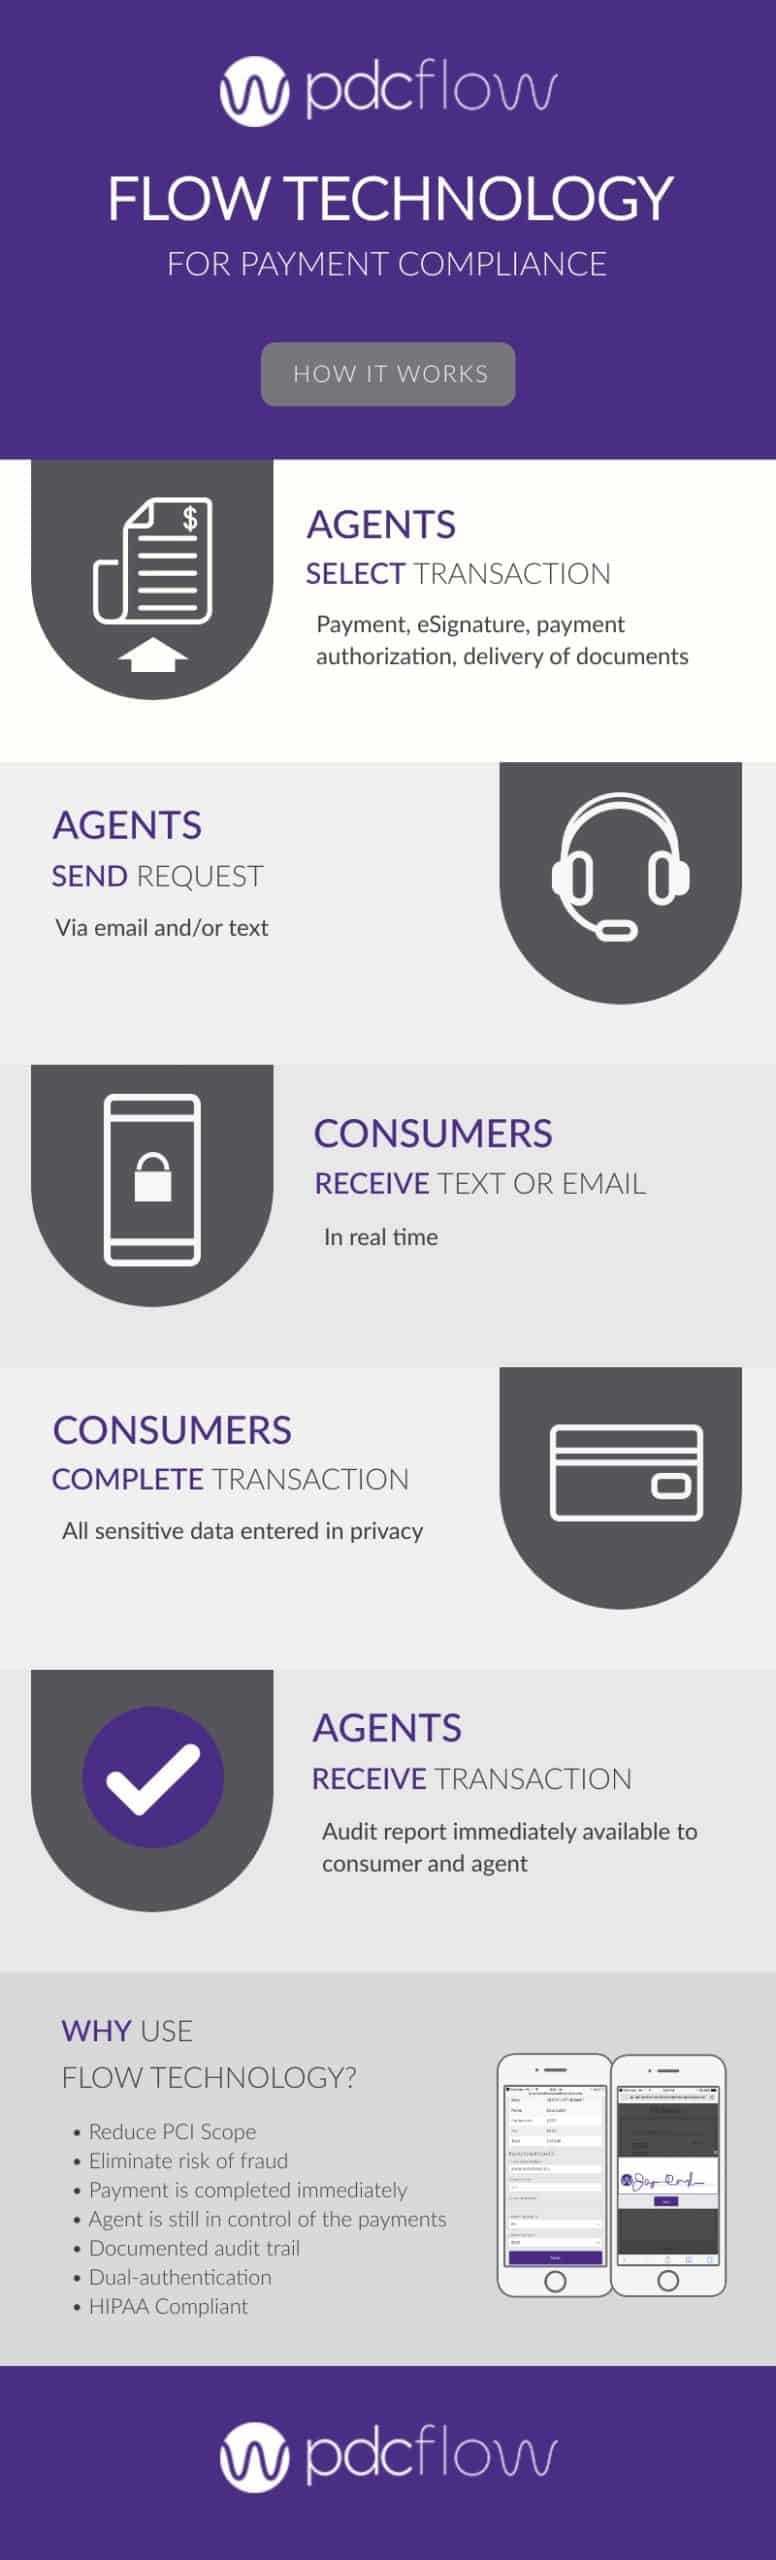 FLOW Technology for Call Center Payment Processing Compliance Infographic